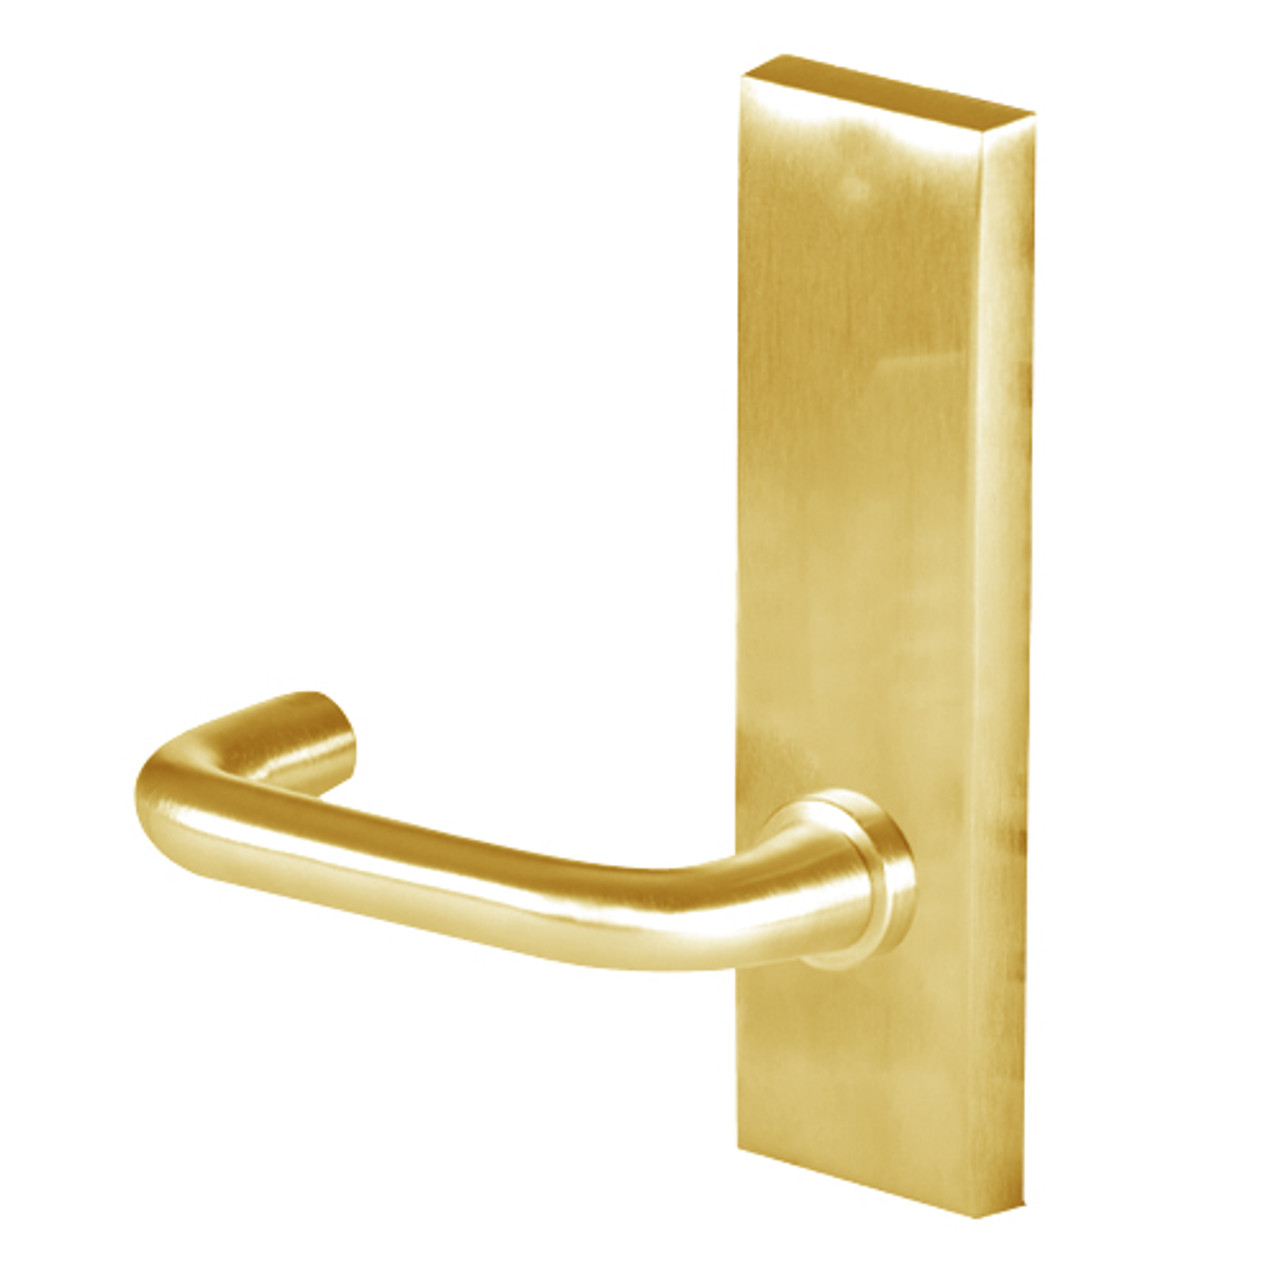 45H0LT3M605 Best 40H Series Privacy Heavy Duty Mortise Lever Lock with Solid Tube Return Style in Bright Brass